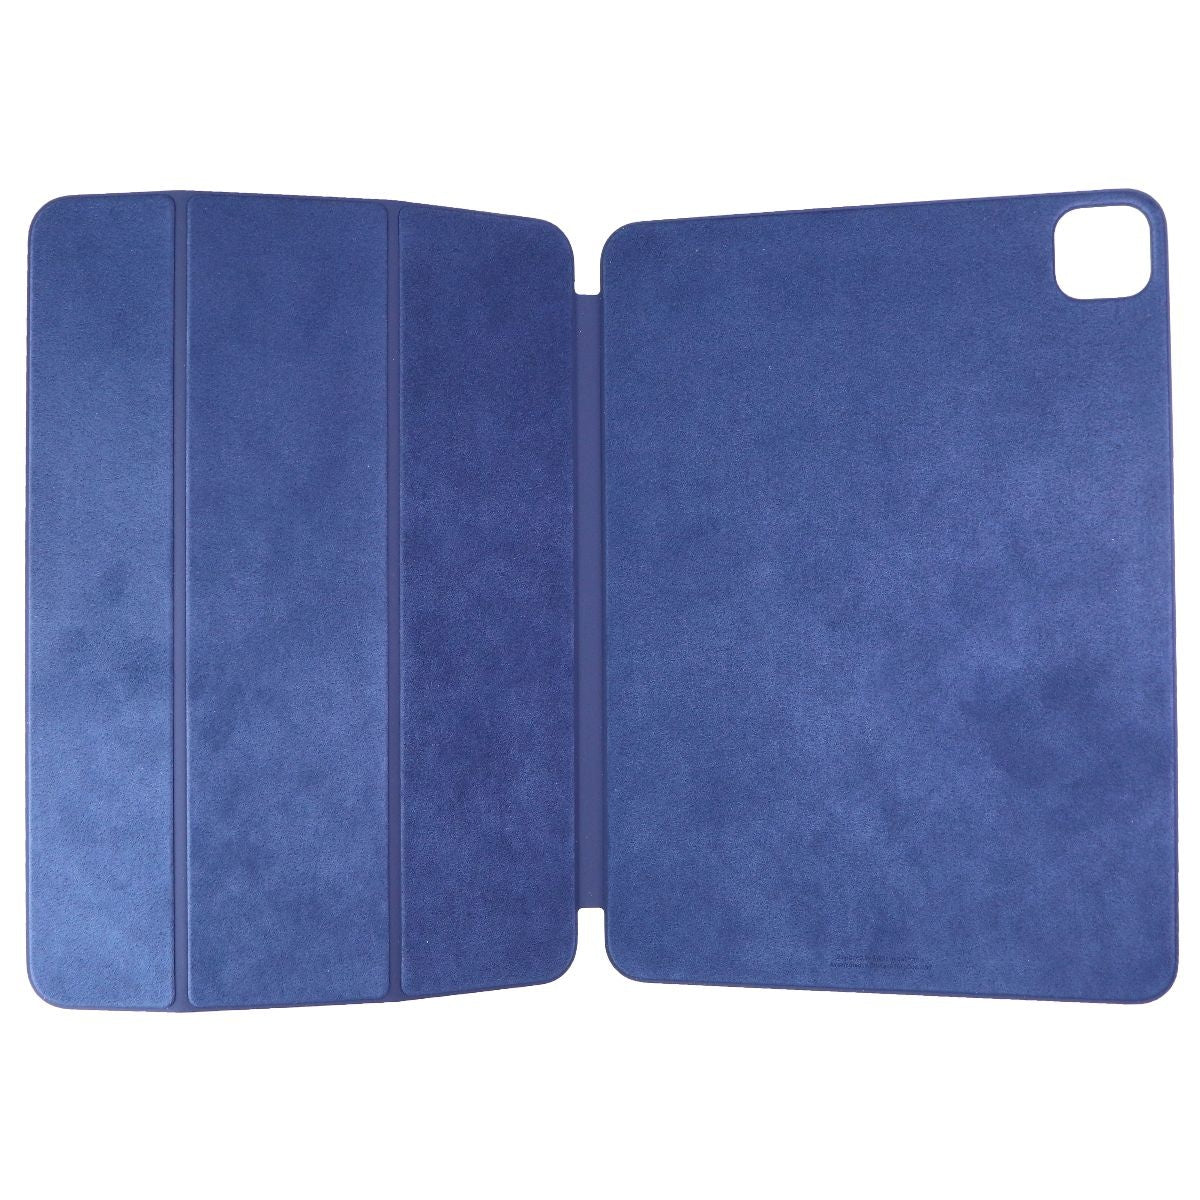 Apple Smart Folio (for iPad Pro 11-inch - 3rd Gen) - Deep Navy (MJMC3ZM/A) iPad/Tablet Accessories - Cases, Covers, Keyboard Folios Apple    - Simple Cell Bulk Wholesale Pricing - USA Seller